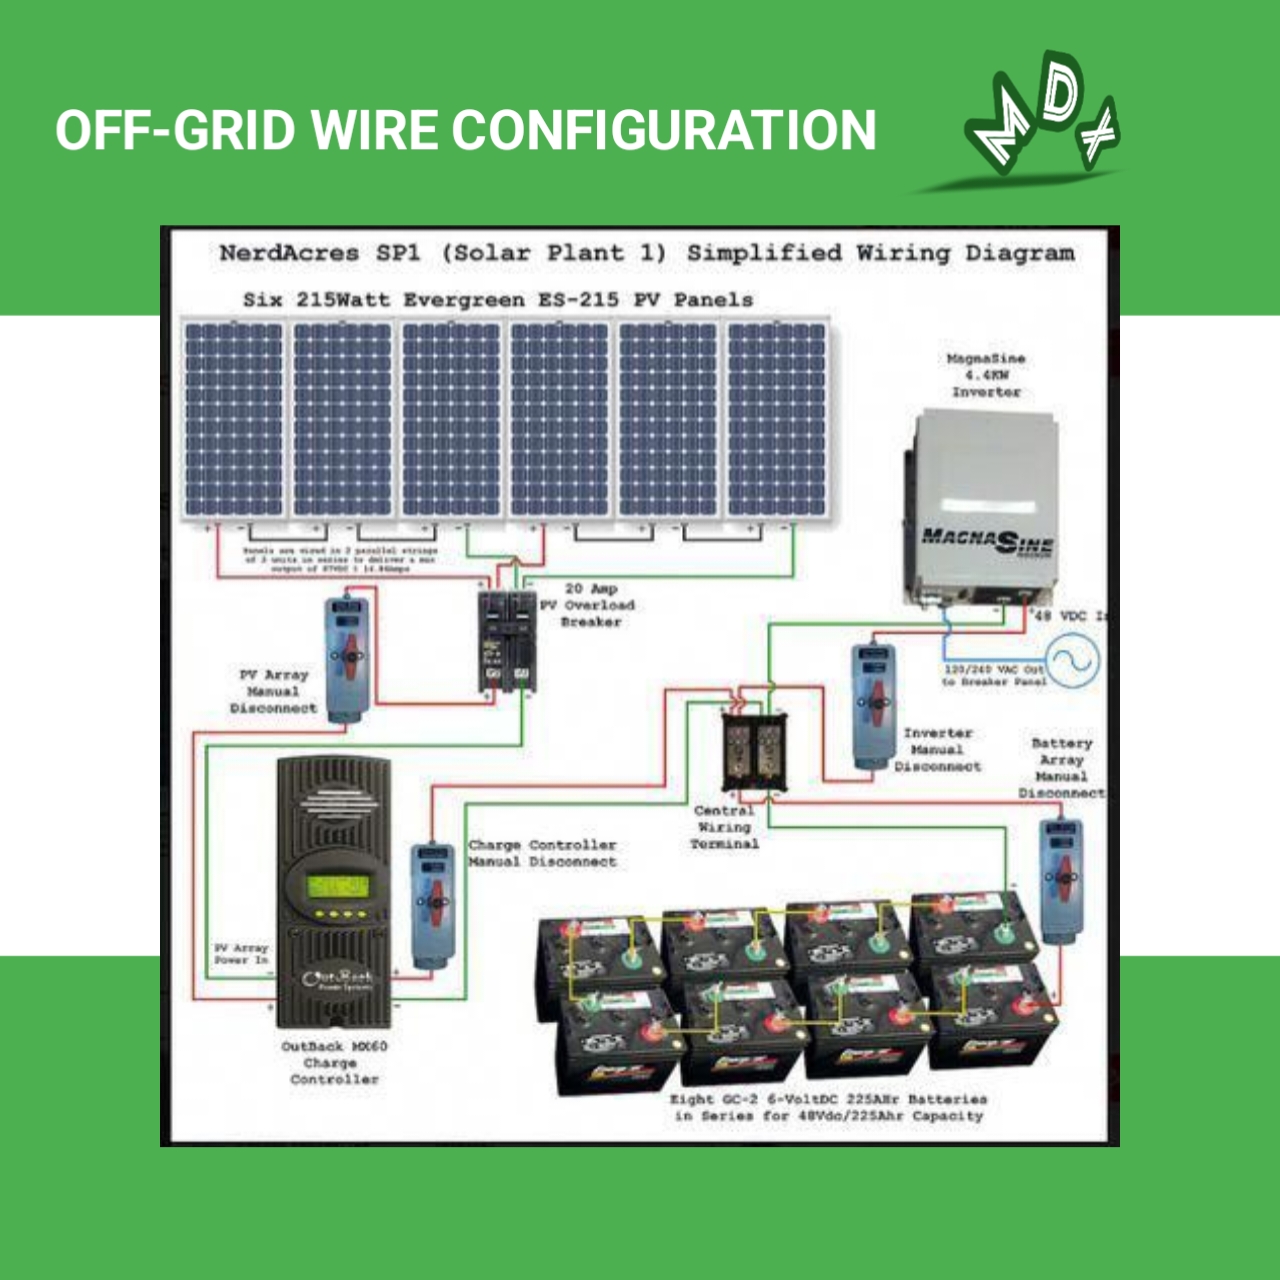 OFF-GRID WIRE CONFIGURATION